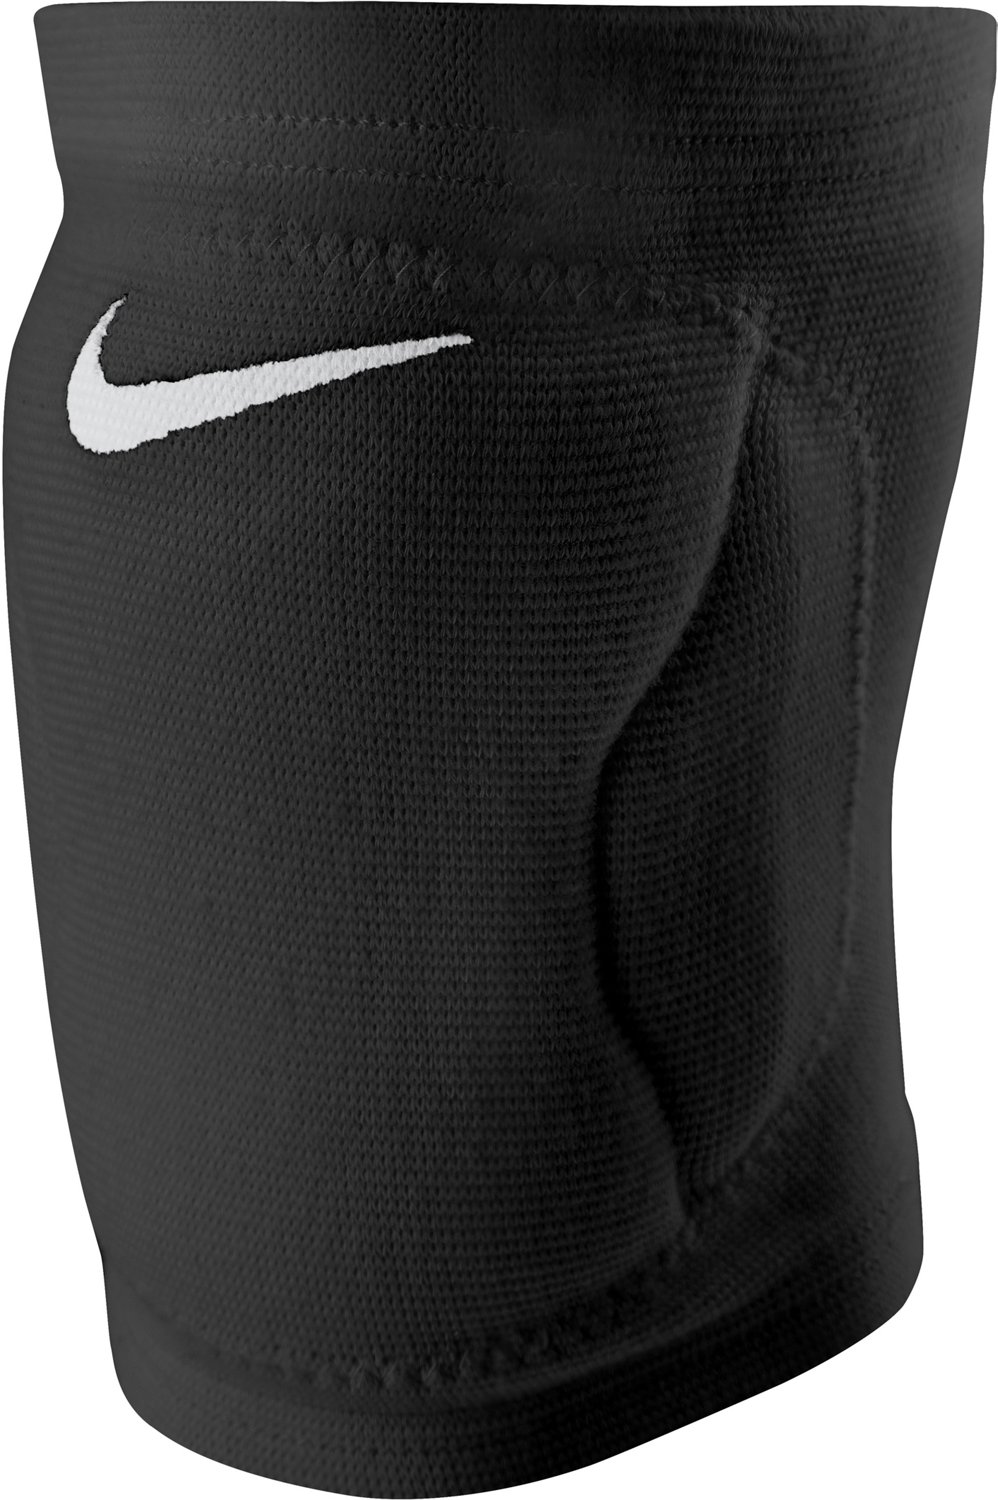 Game On Youth Basketball Knee Pads